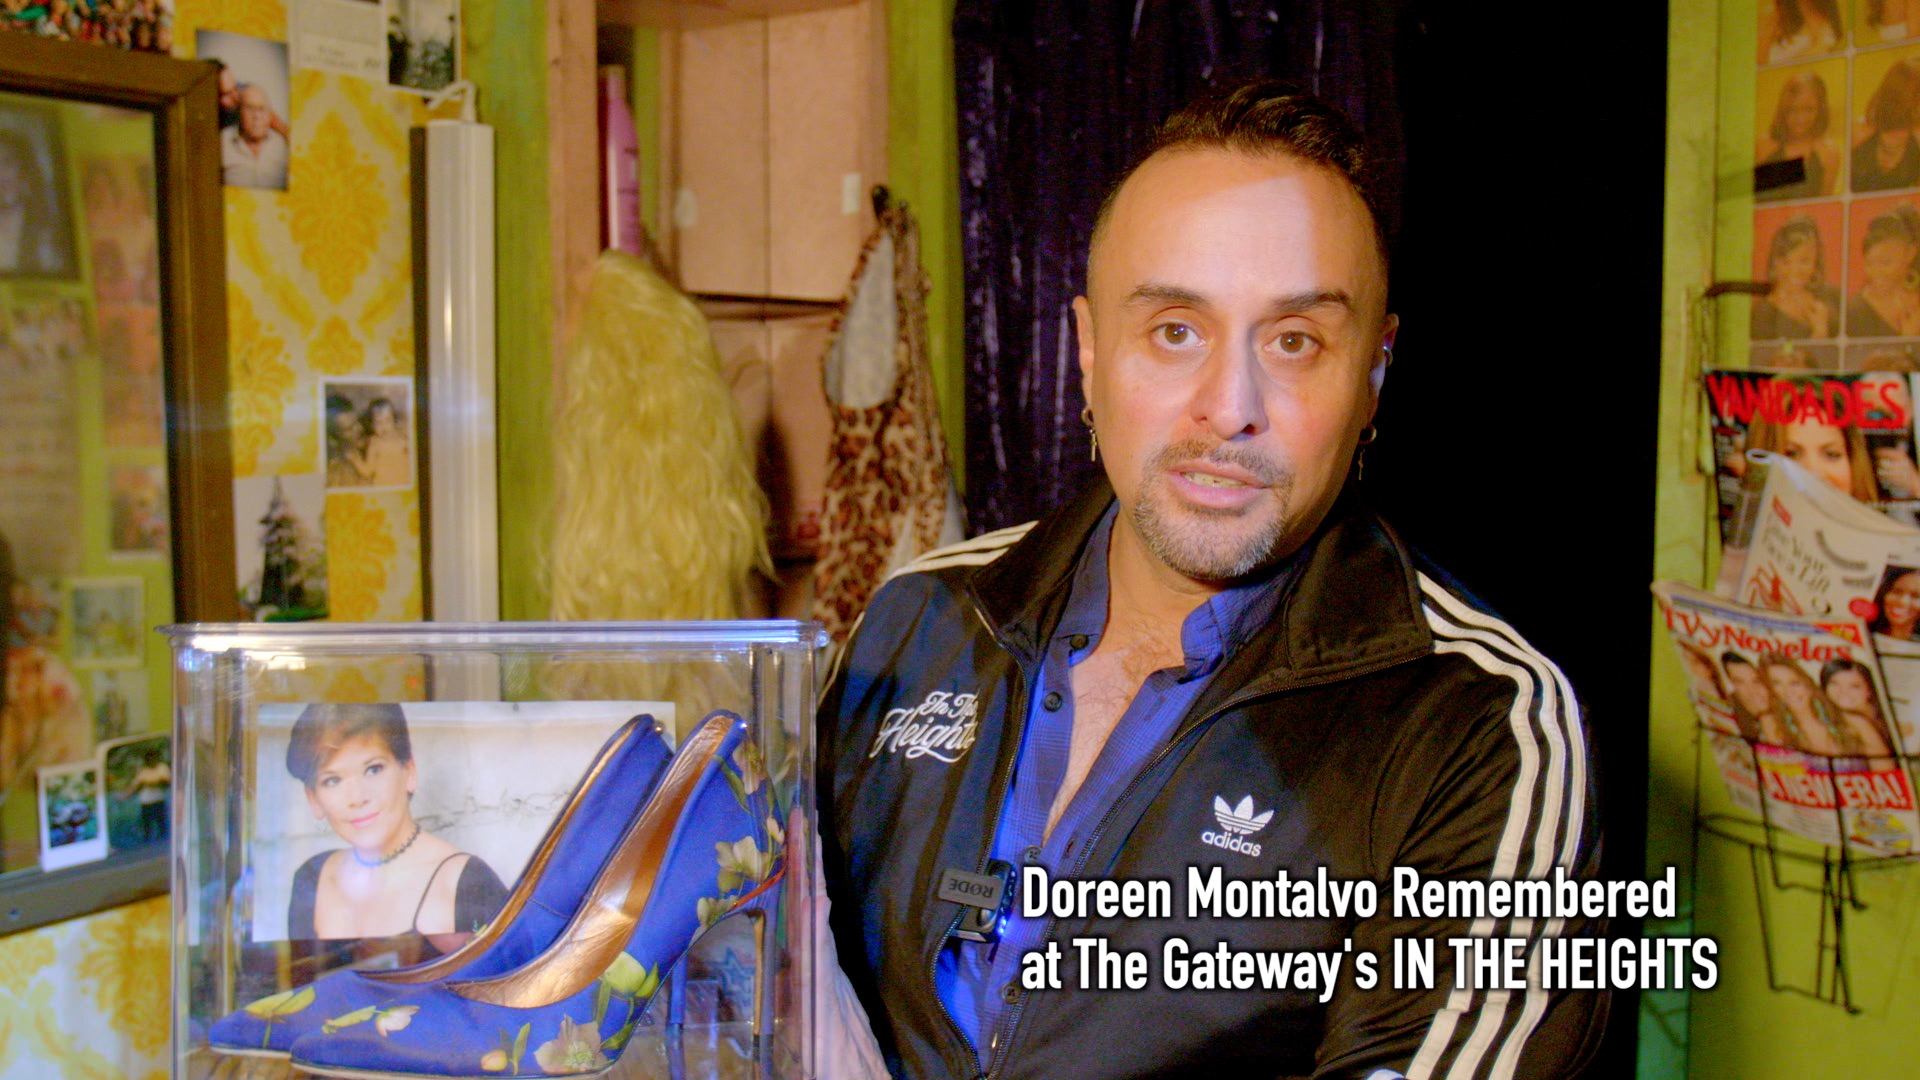 Doreen Montalvo Remembered at The Gateway's In The Heights (Vincent Ortega)